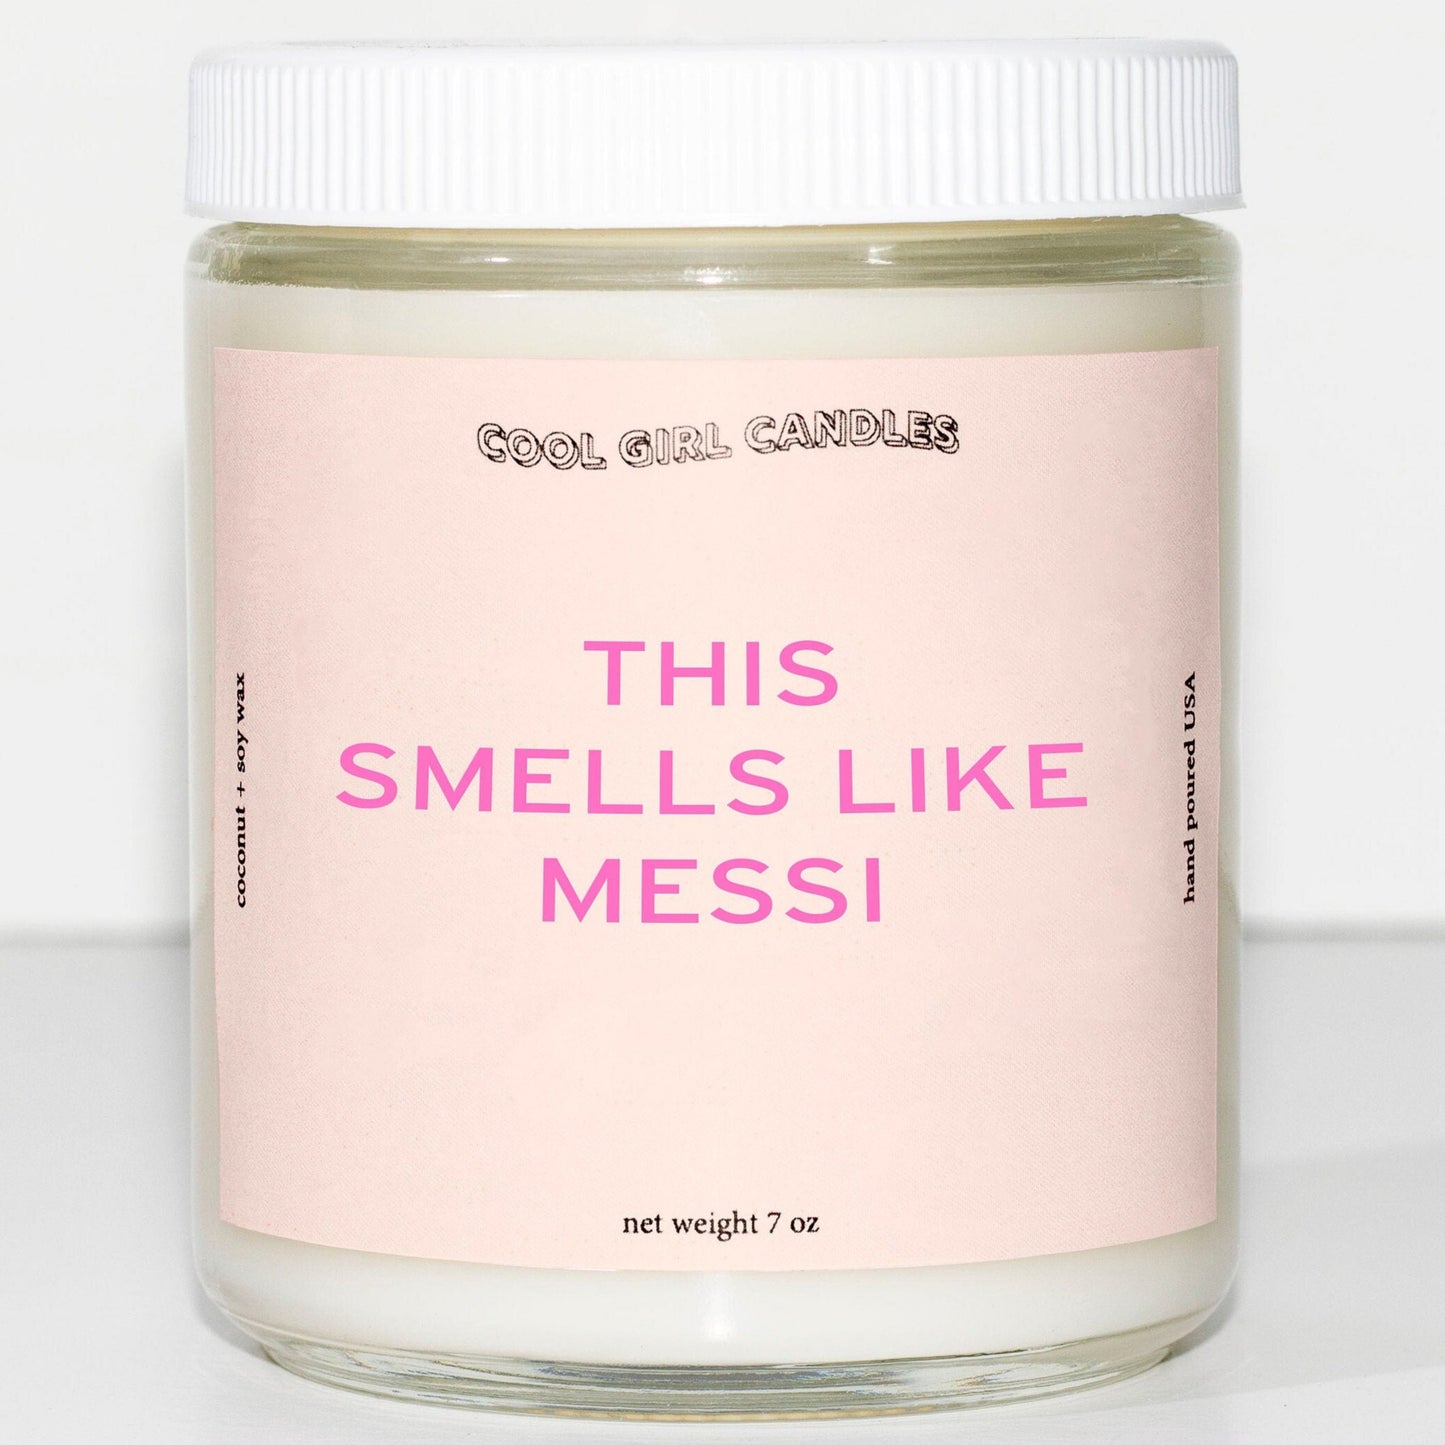 this smells like messi scented candle